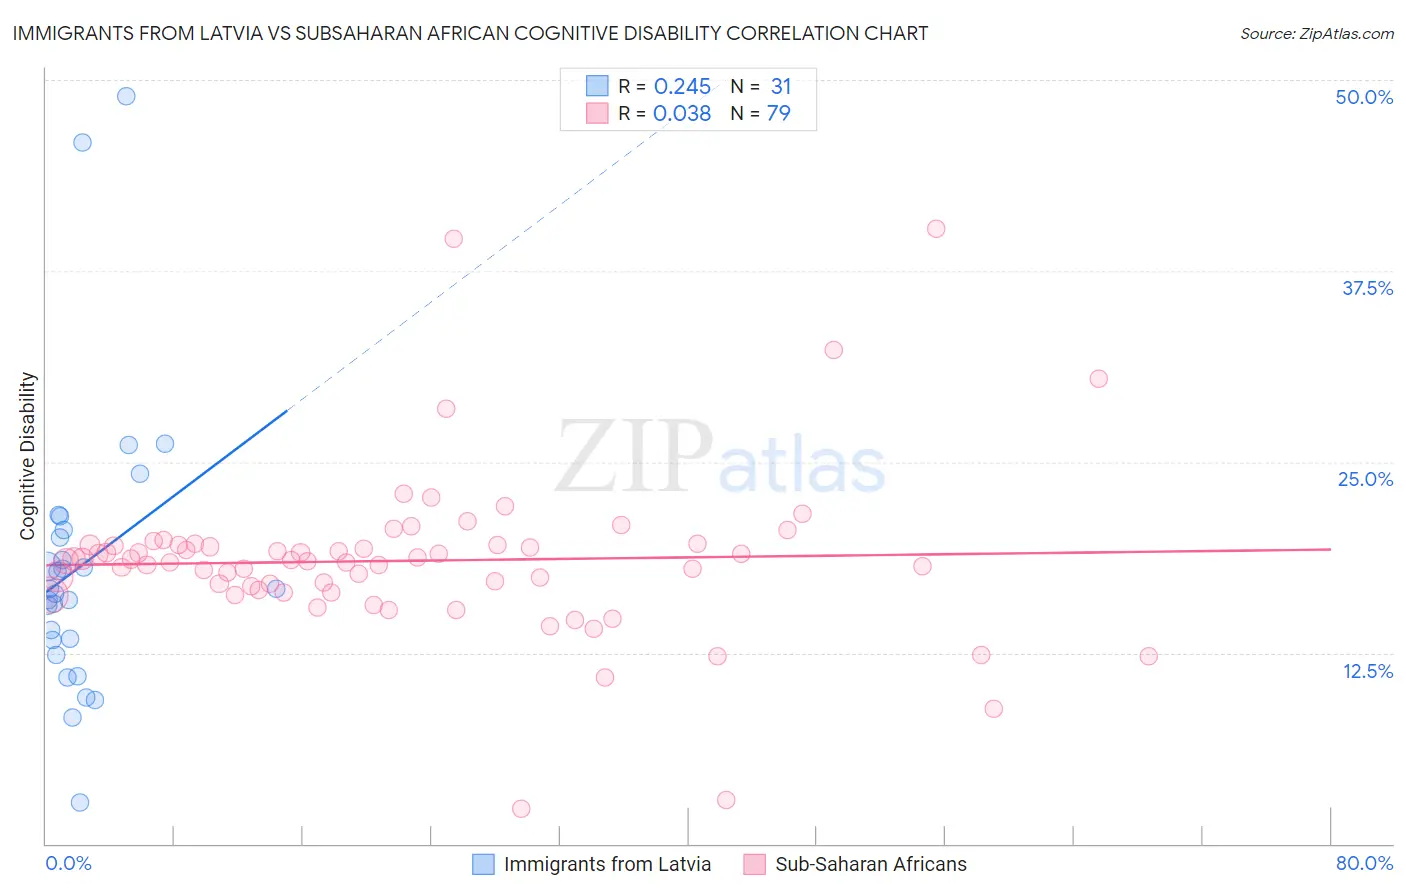 Immigrants from Latvia vs Subsaharan African Cognitive Disability